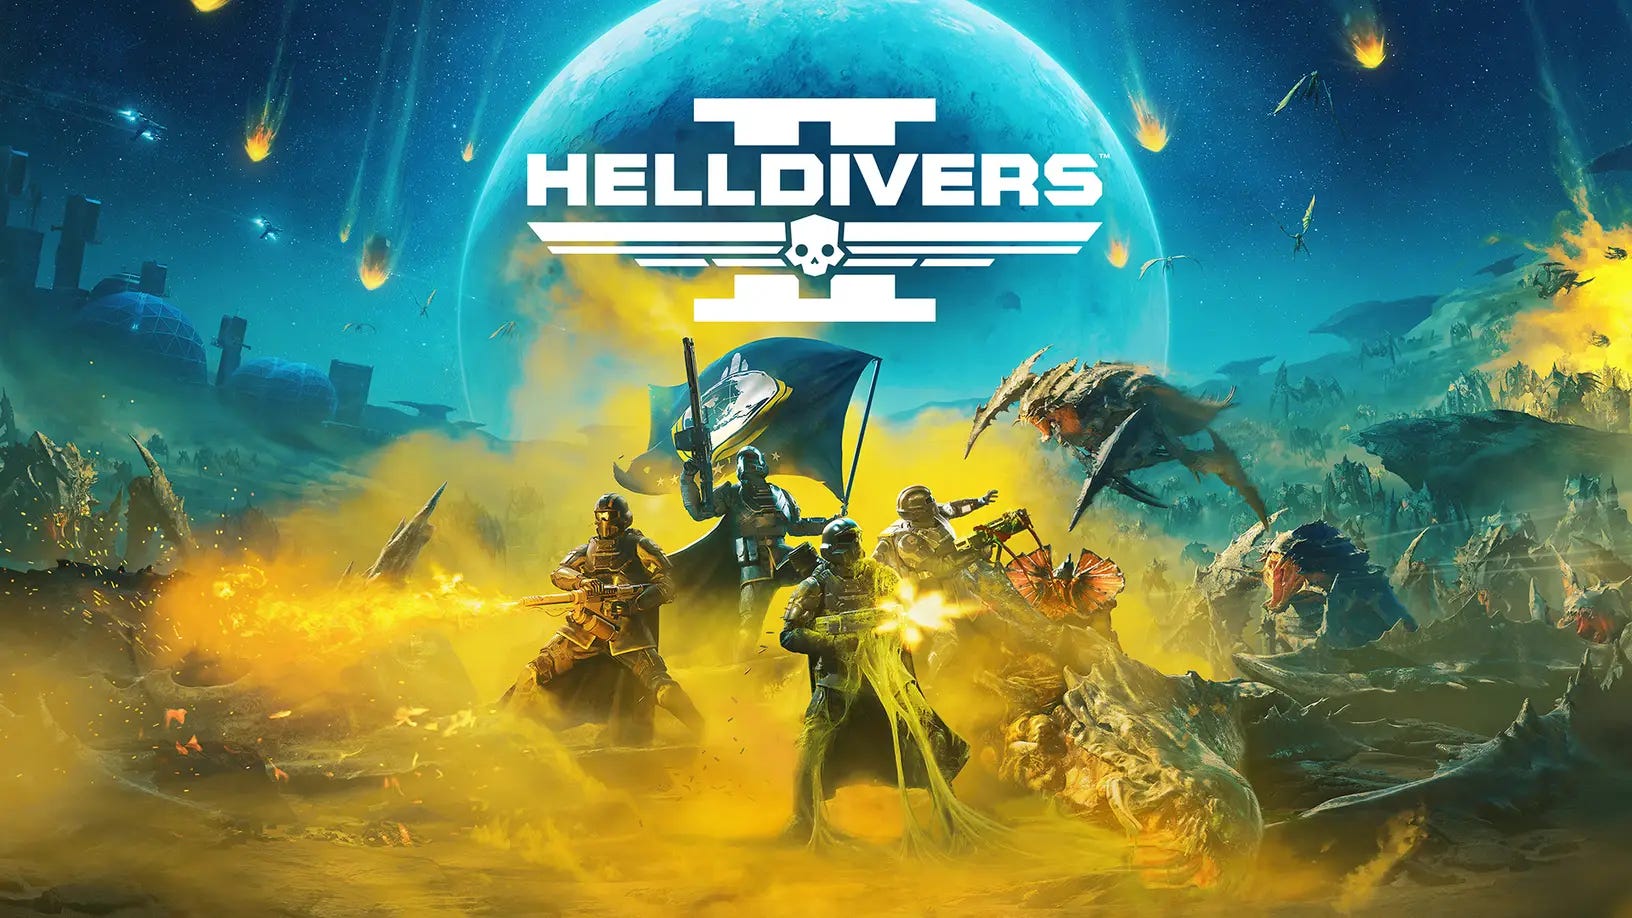 Helldivers 2 prepped to plunge onto PC and PS5 February 8